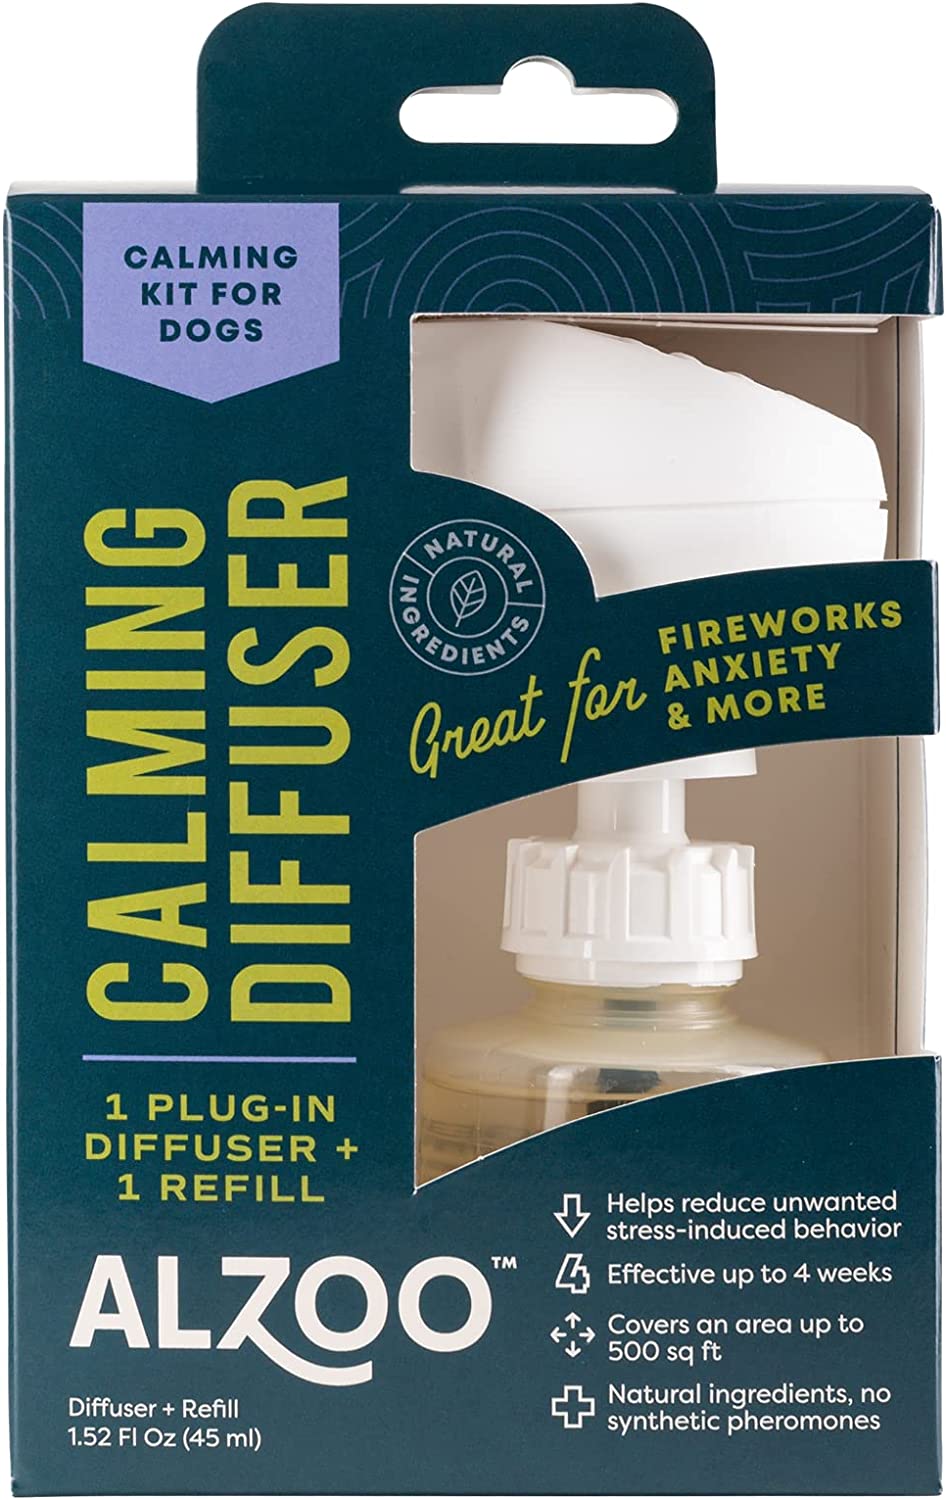 ALZOO All Natural Calming Plug-in + Refill for Dogs